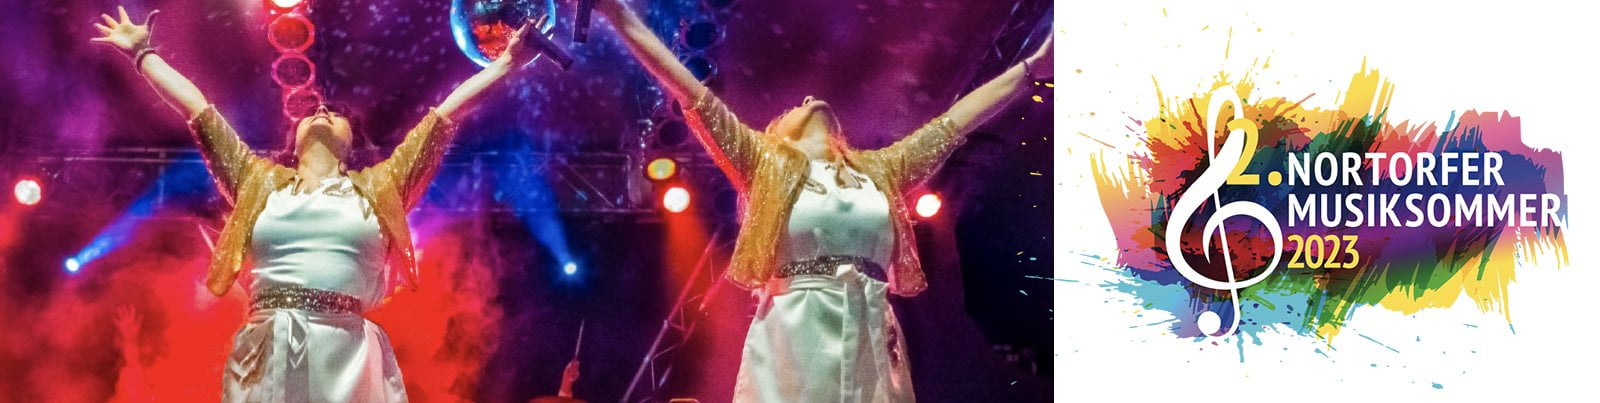 2. Nortorfer Musiksommer mit ABBA Review - Internationales ABBA Tribute